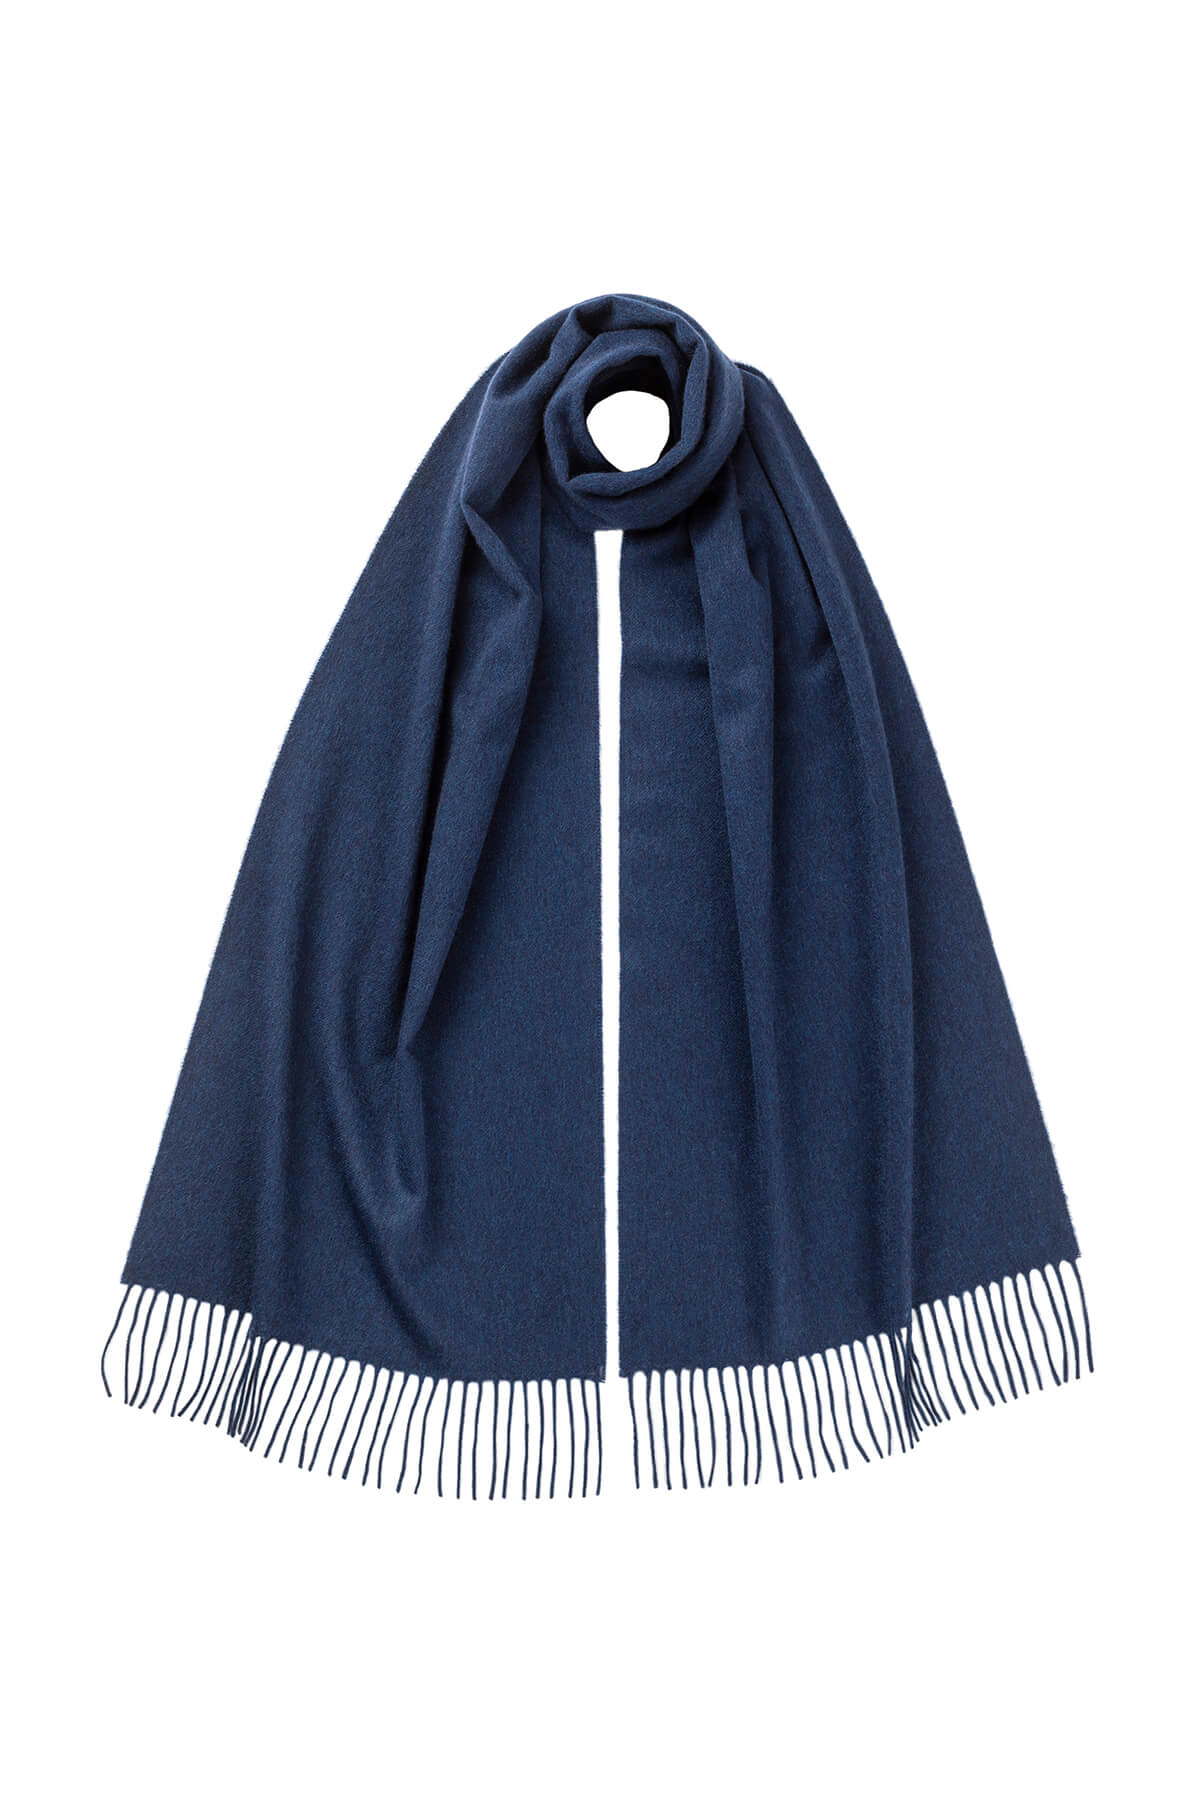 Johnstons of Elgin Oversized Cashmere Scarf in Ocean on a white background WA000057HD7244ONE